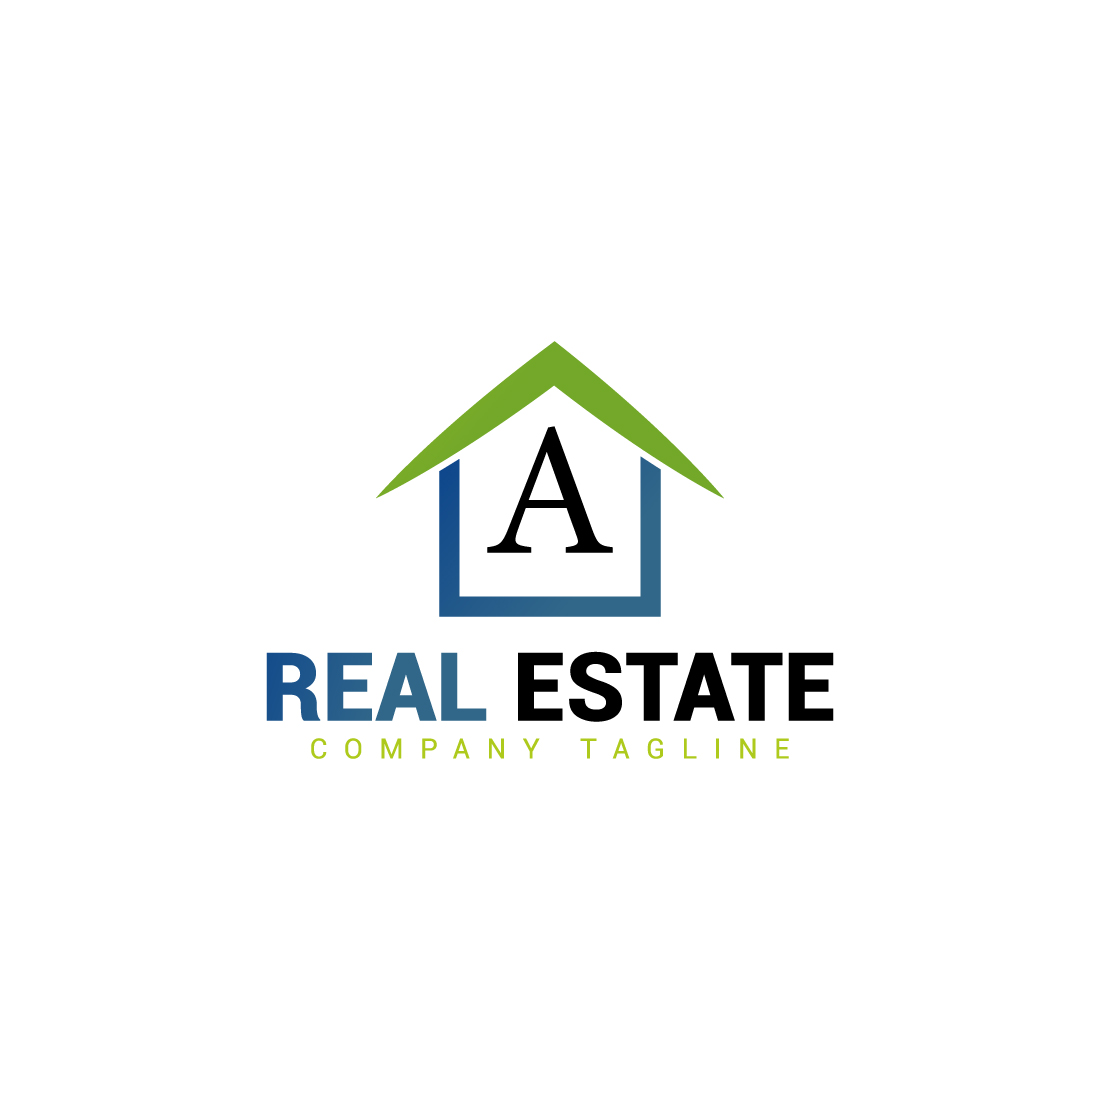 A Real estate logo with green dark blue color cover image.